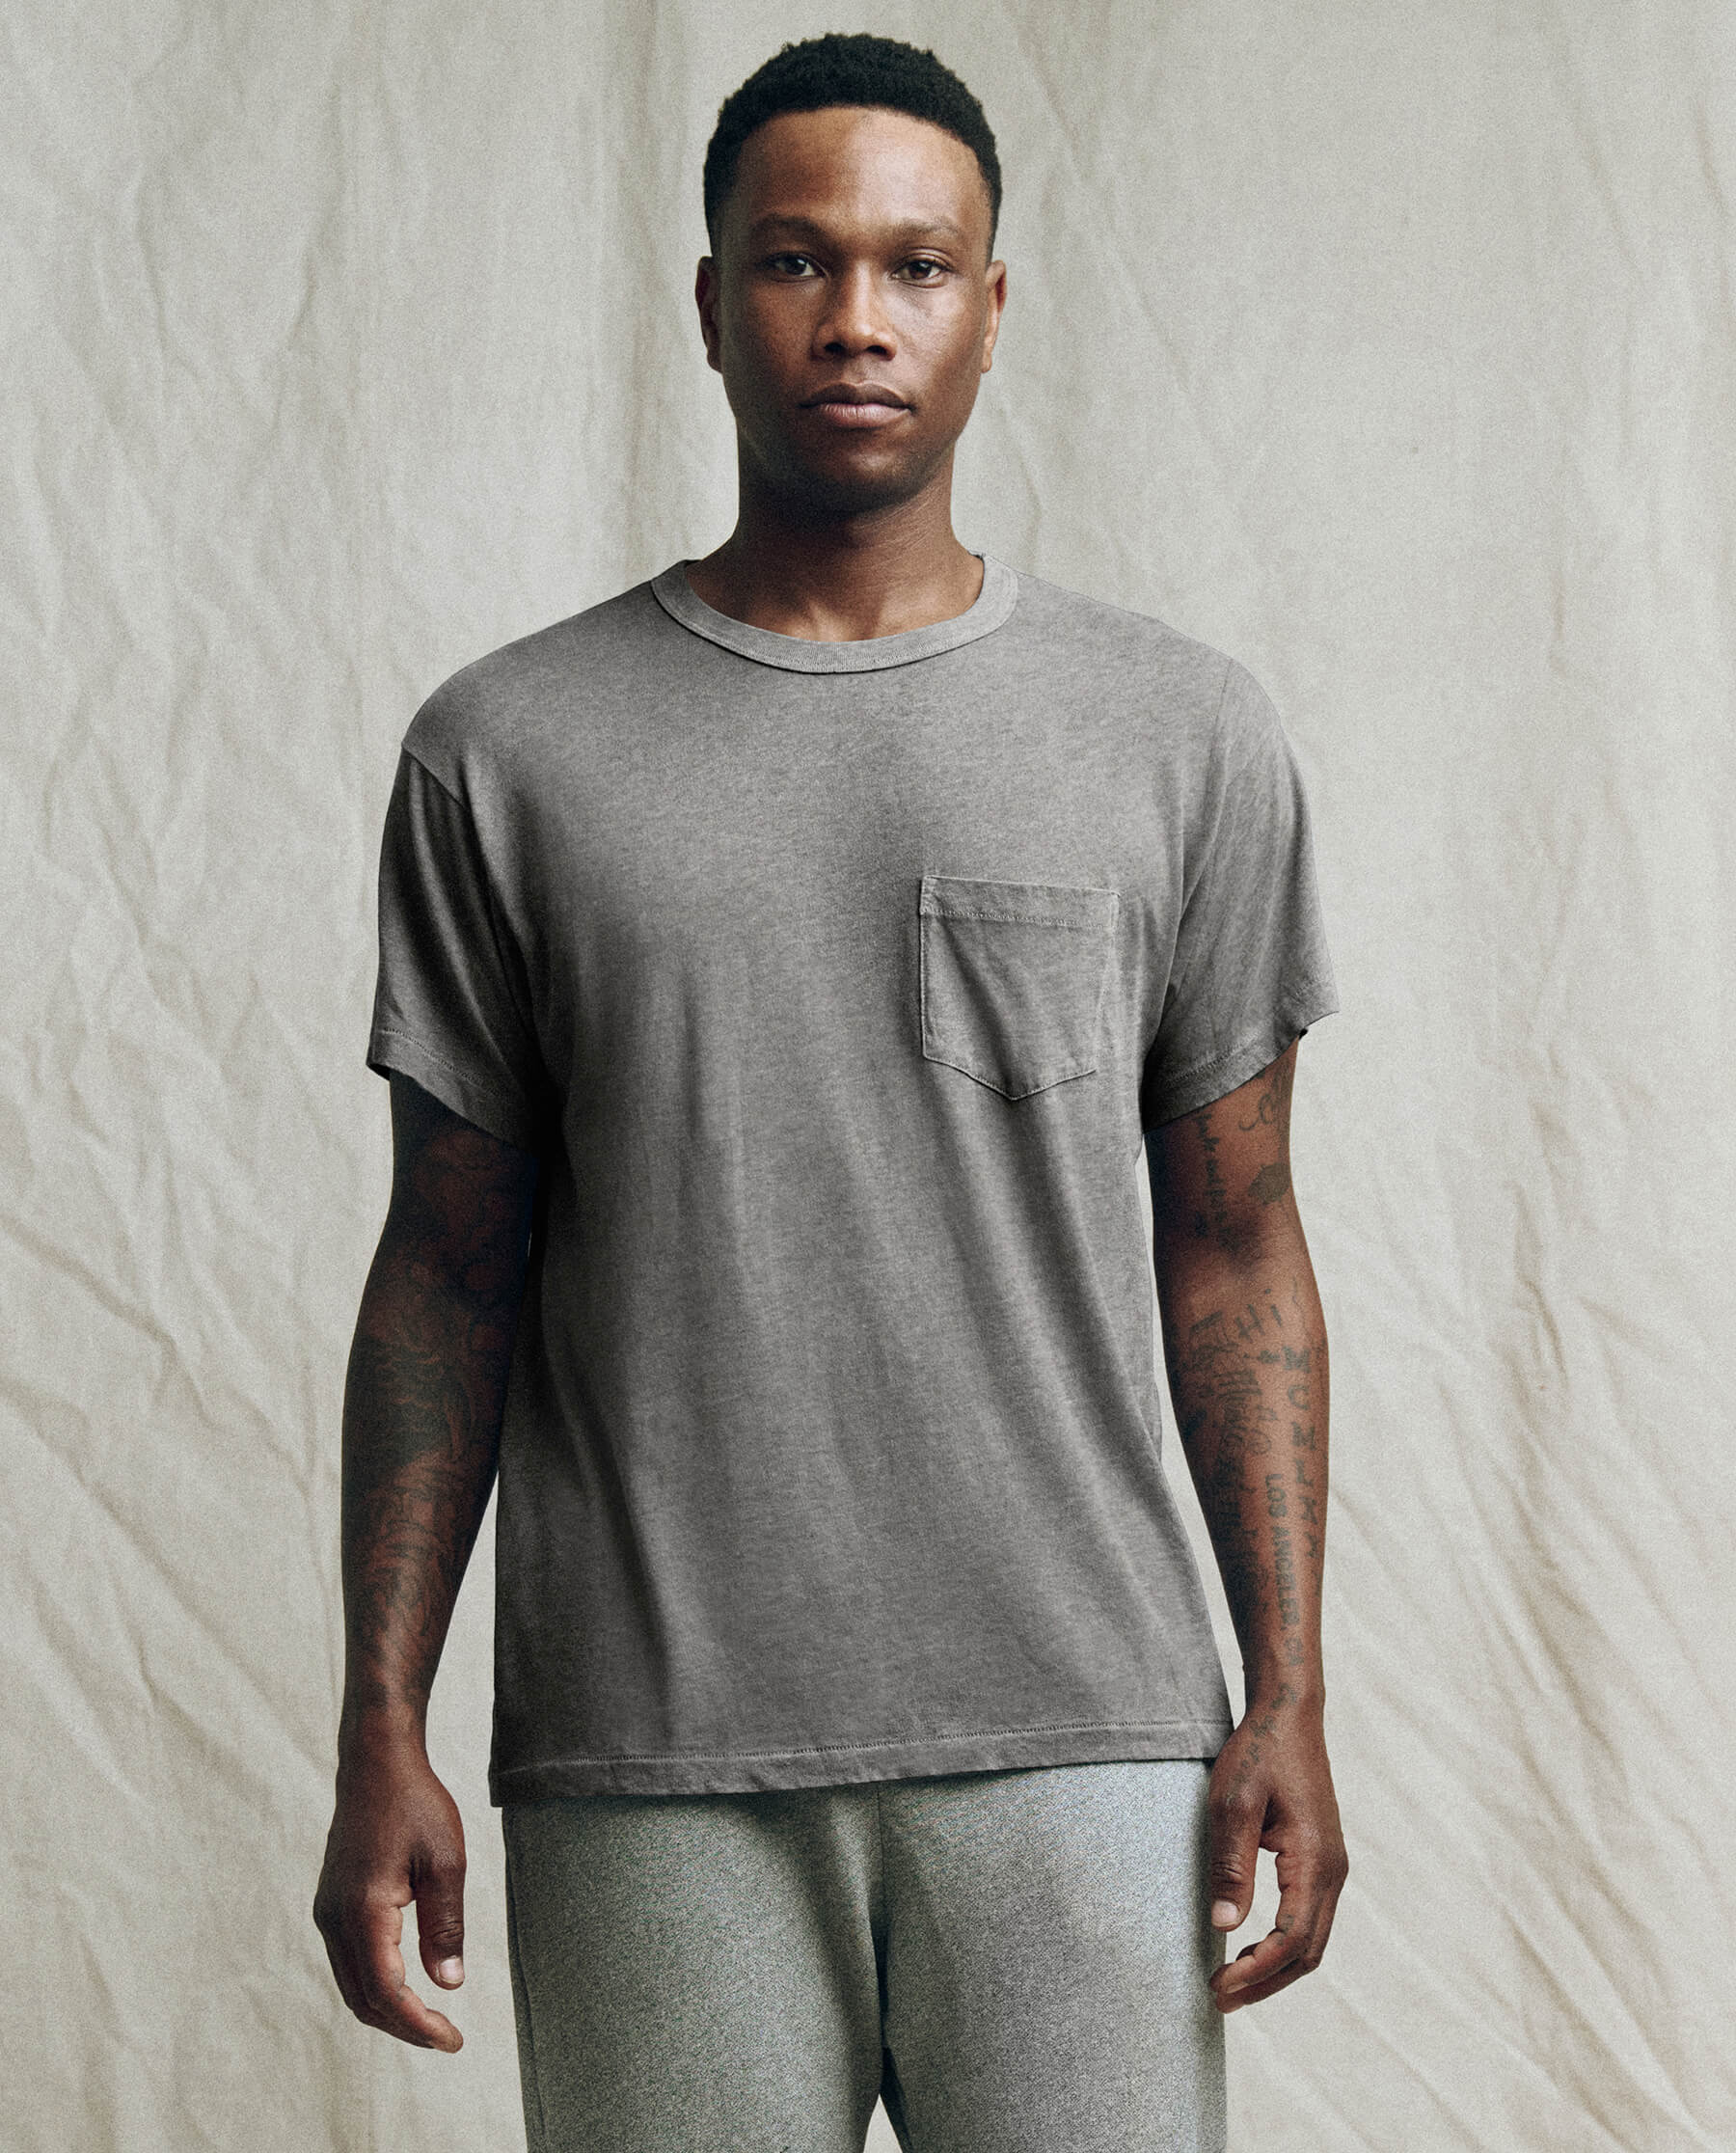 The Men's Pocket Tee. -- Heather Grey TEES THE GREAT. SP23 MENS